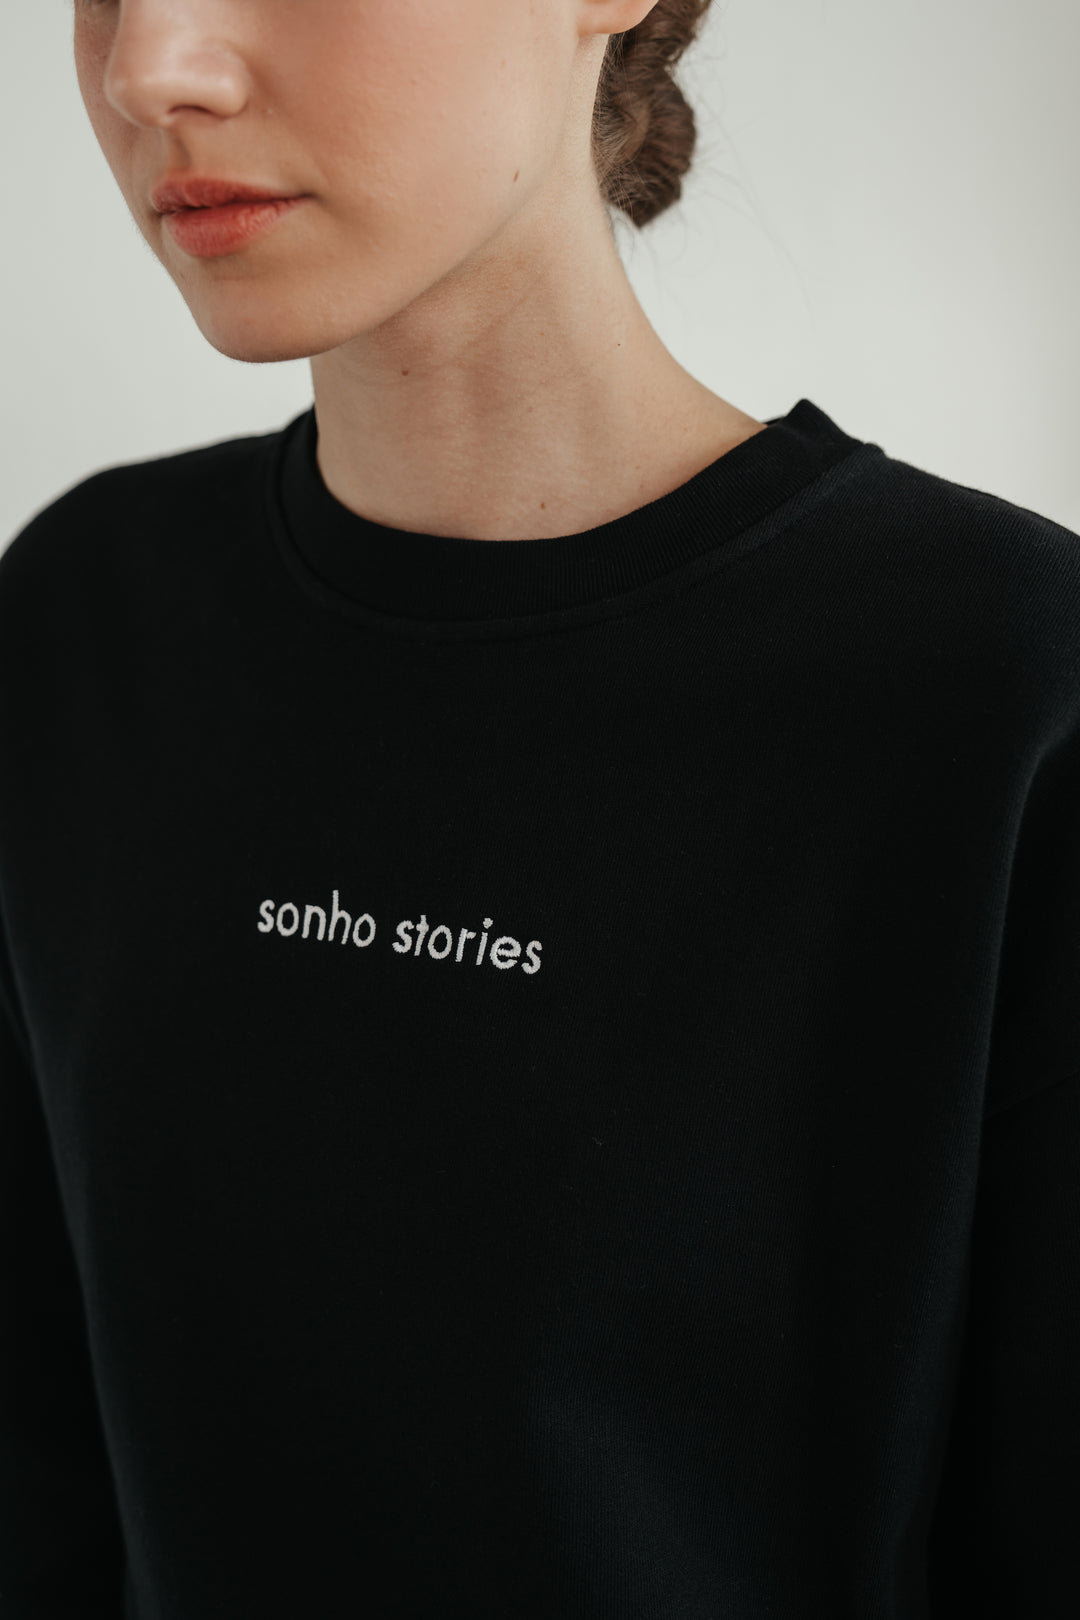 Unisex sweater with a relaxed fit and embroidered logo